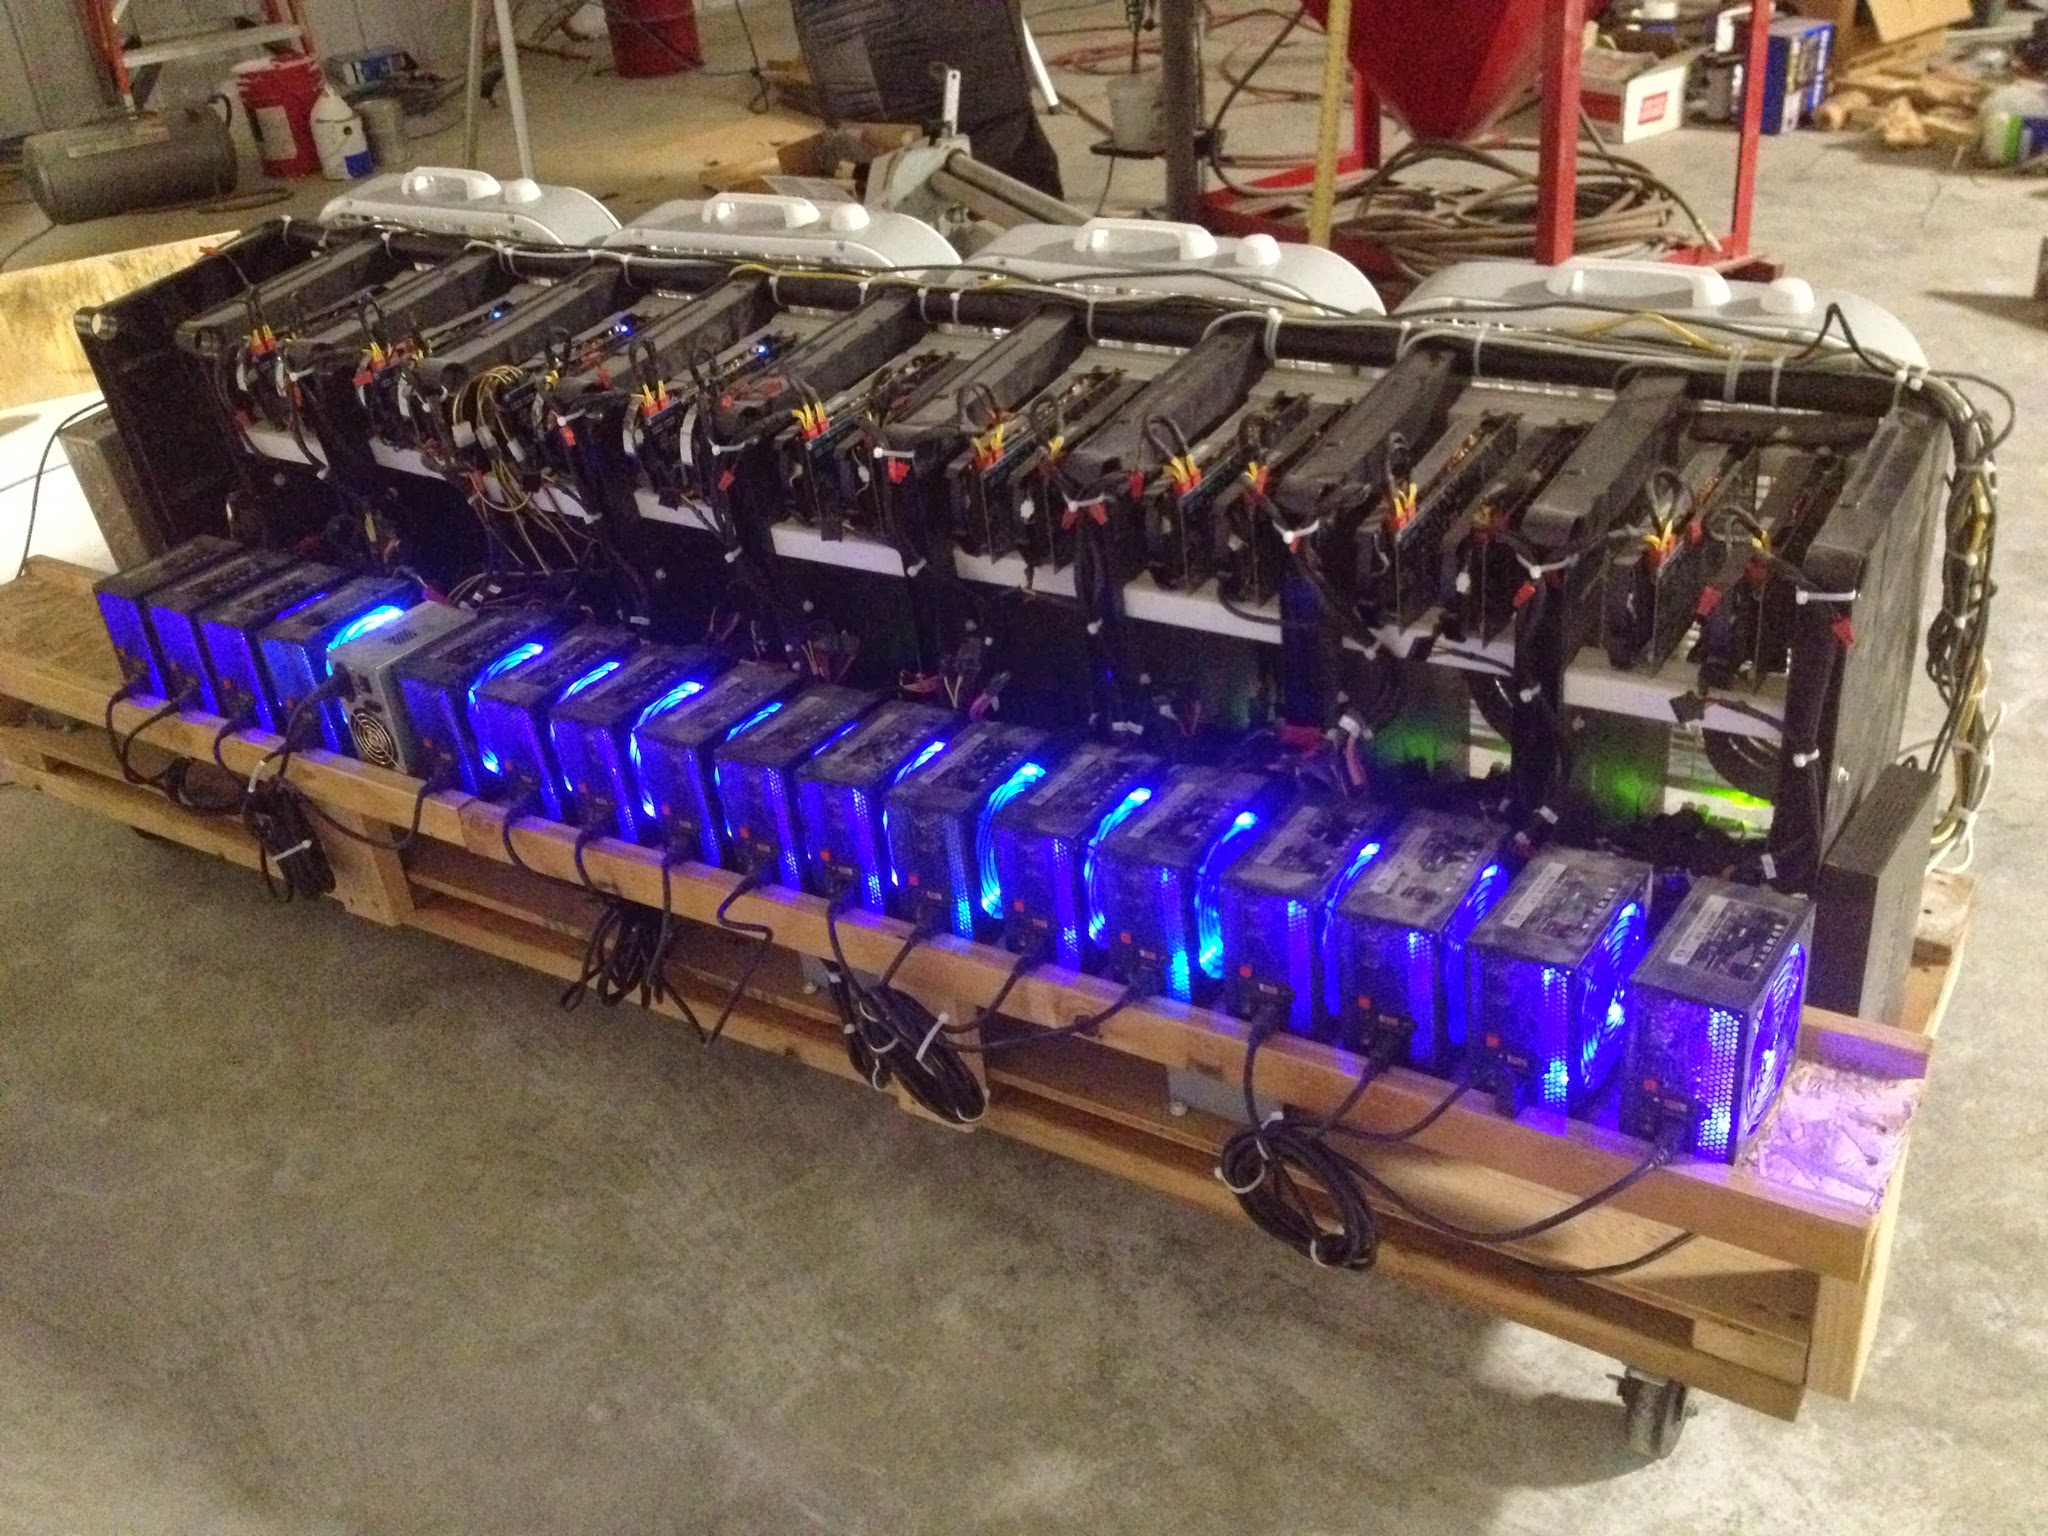 Limón Higgins detalles Crypto miners dump their GPUs on Ebay as Ethereum drops almost 50% in value  - NotebookCheck.net News